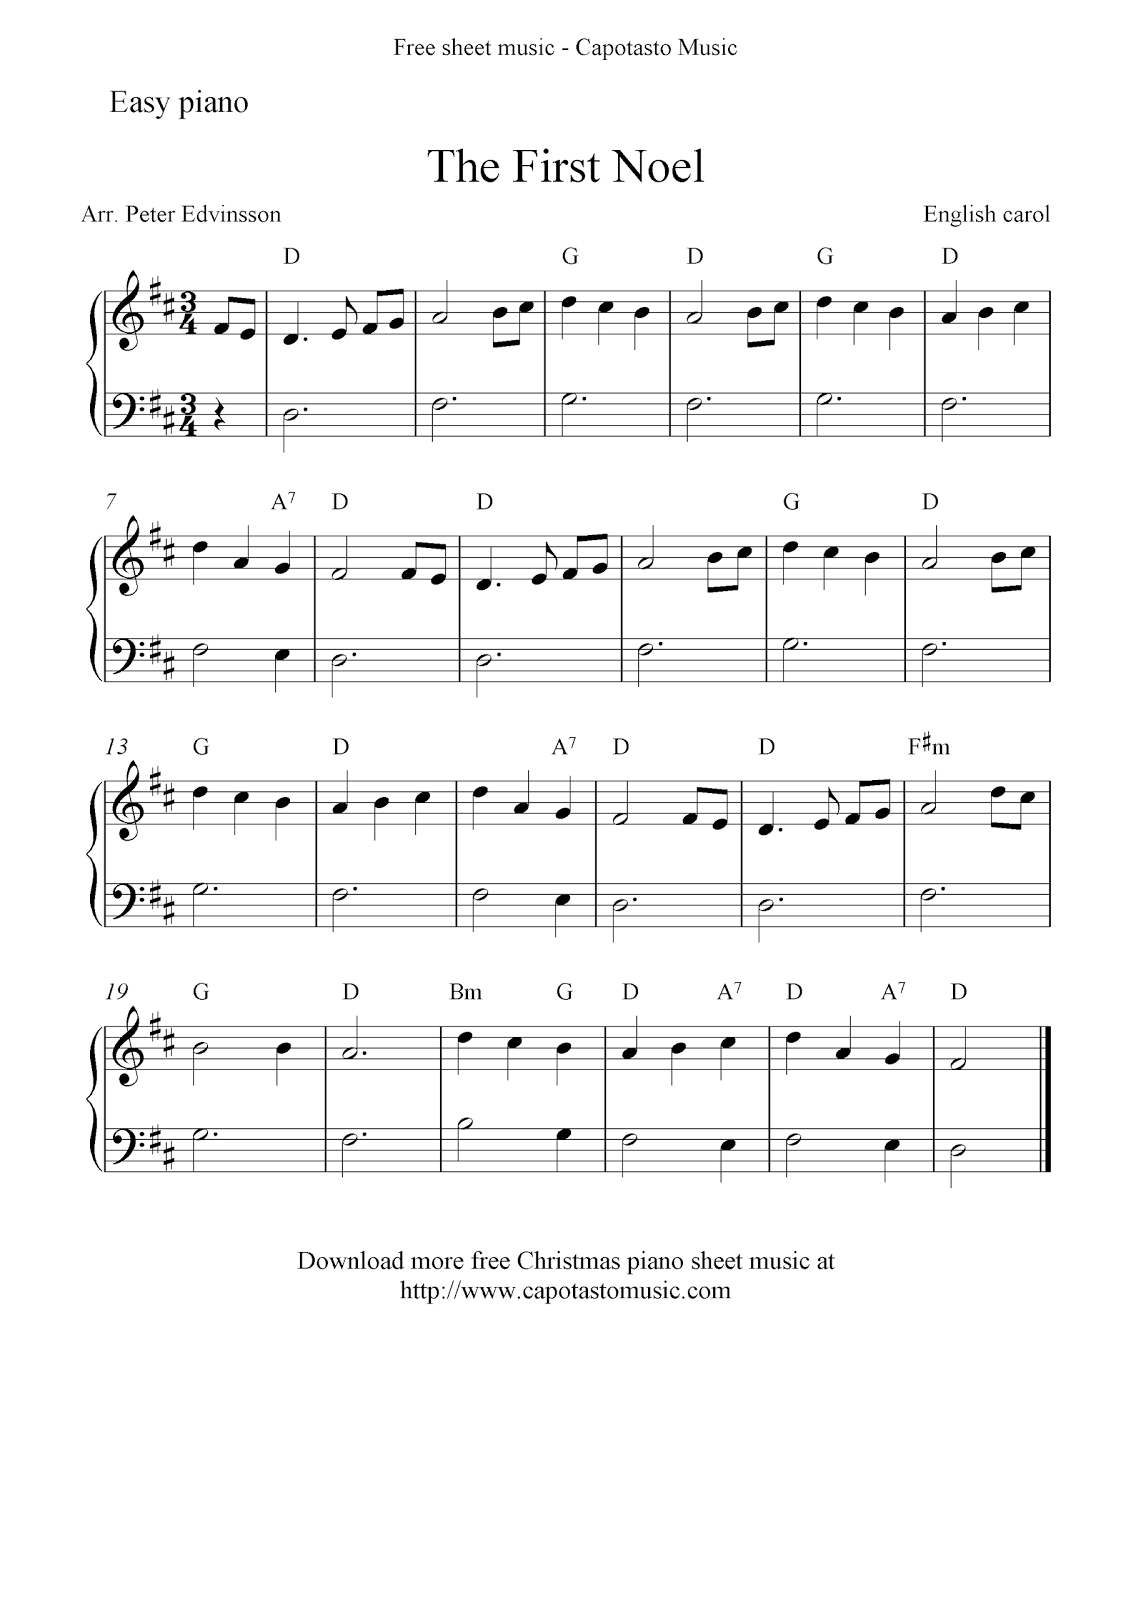 Easy Free Christmas Sheet Music For Piano, The First Noel - Free Printable Christmas Music Sheets Piano